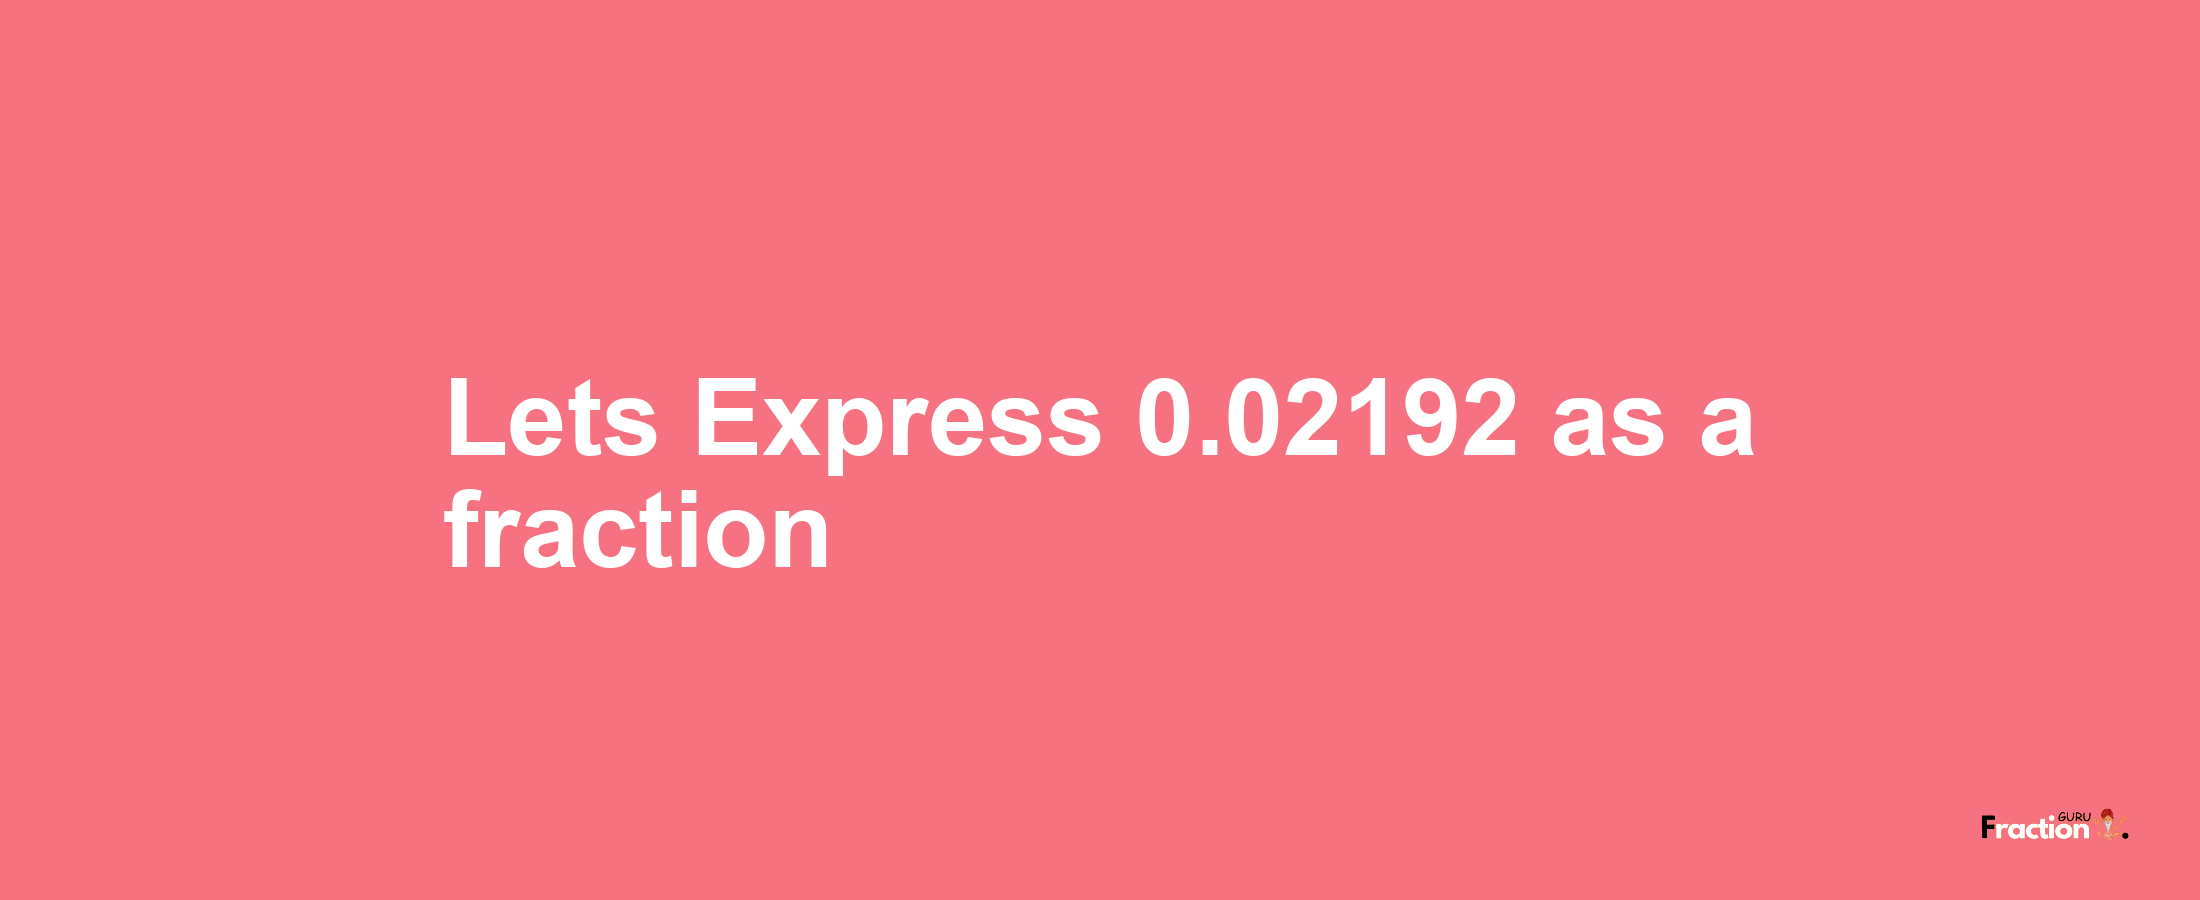 Lets Express 0.02192 as afraction